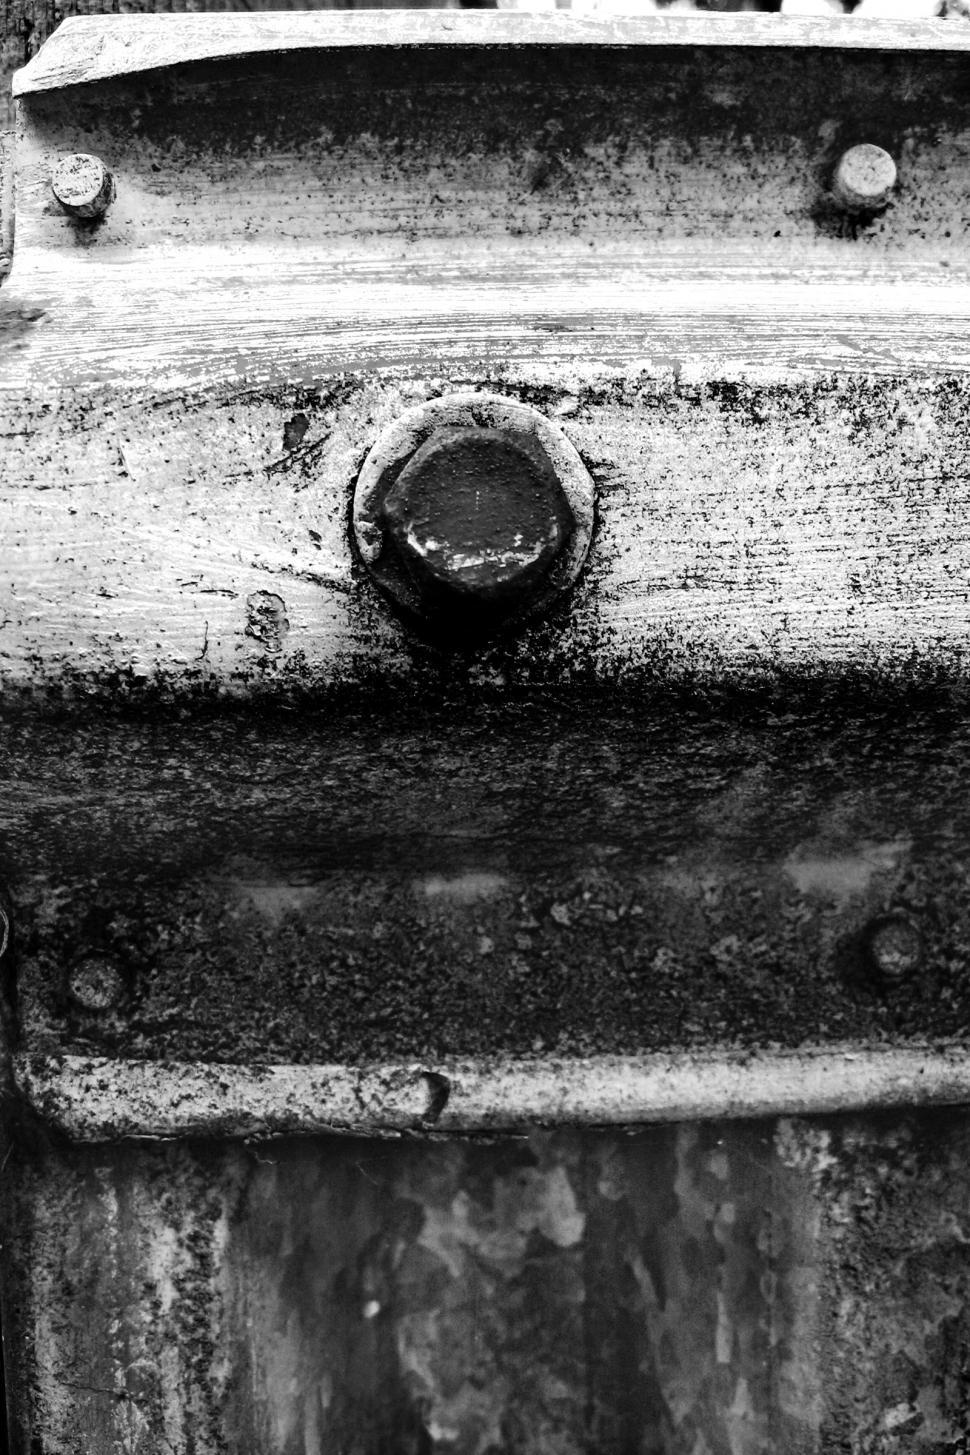 Free Image of Rusty Fire Hydrant in Black and White 